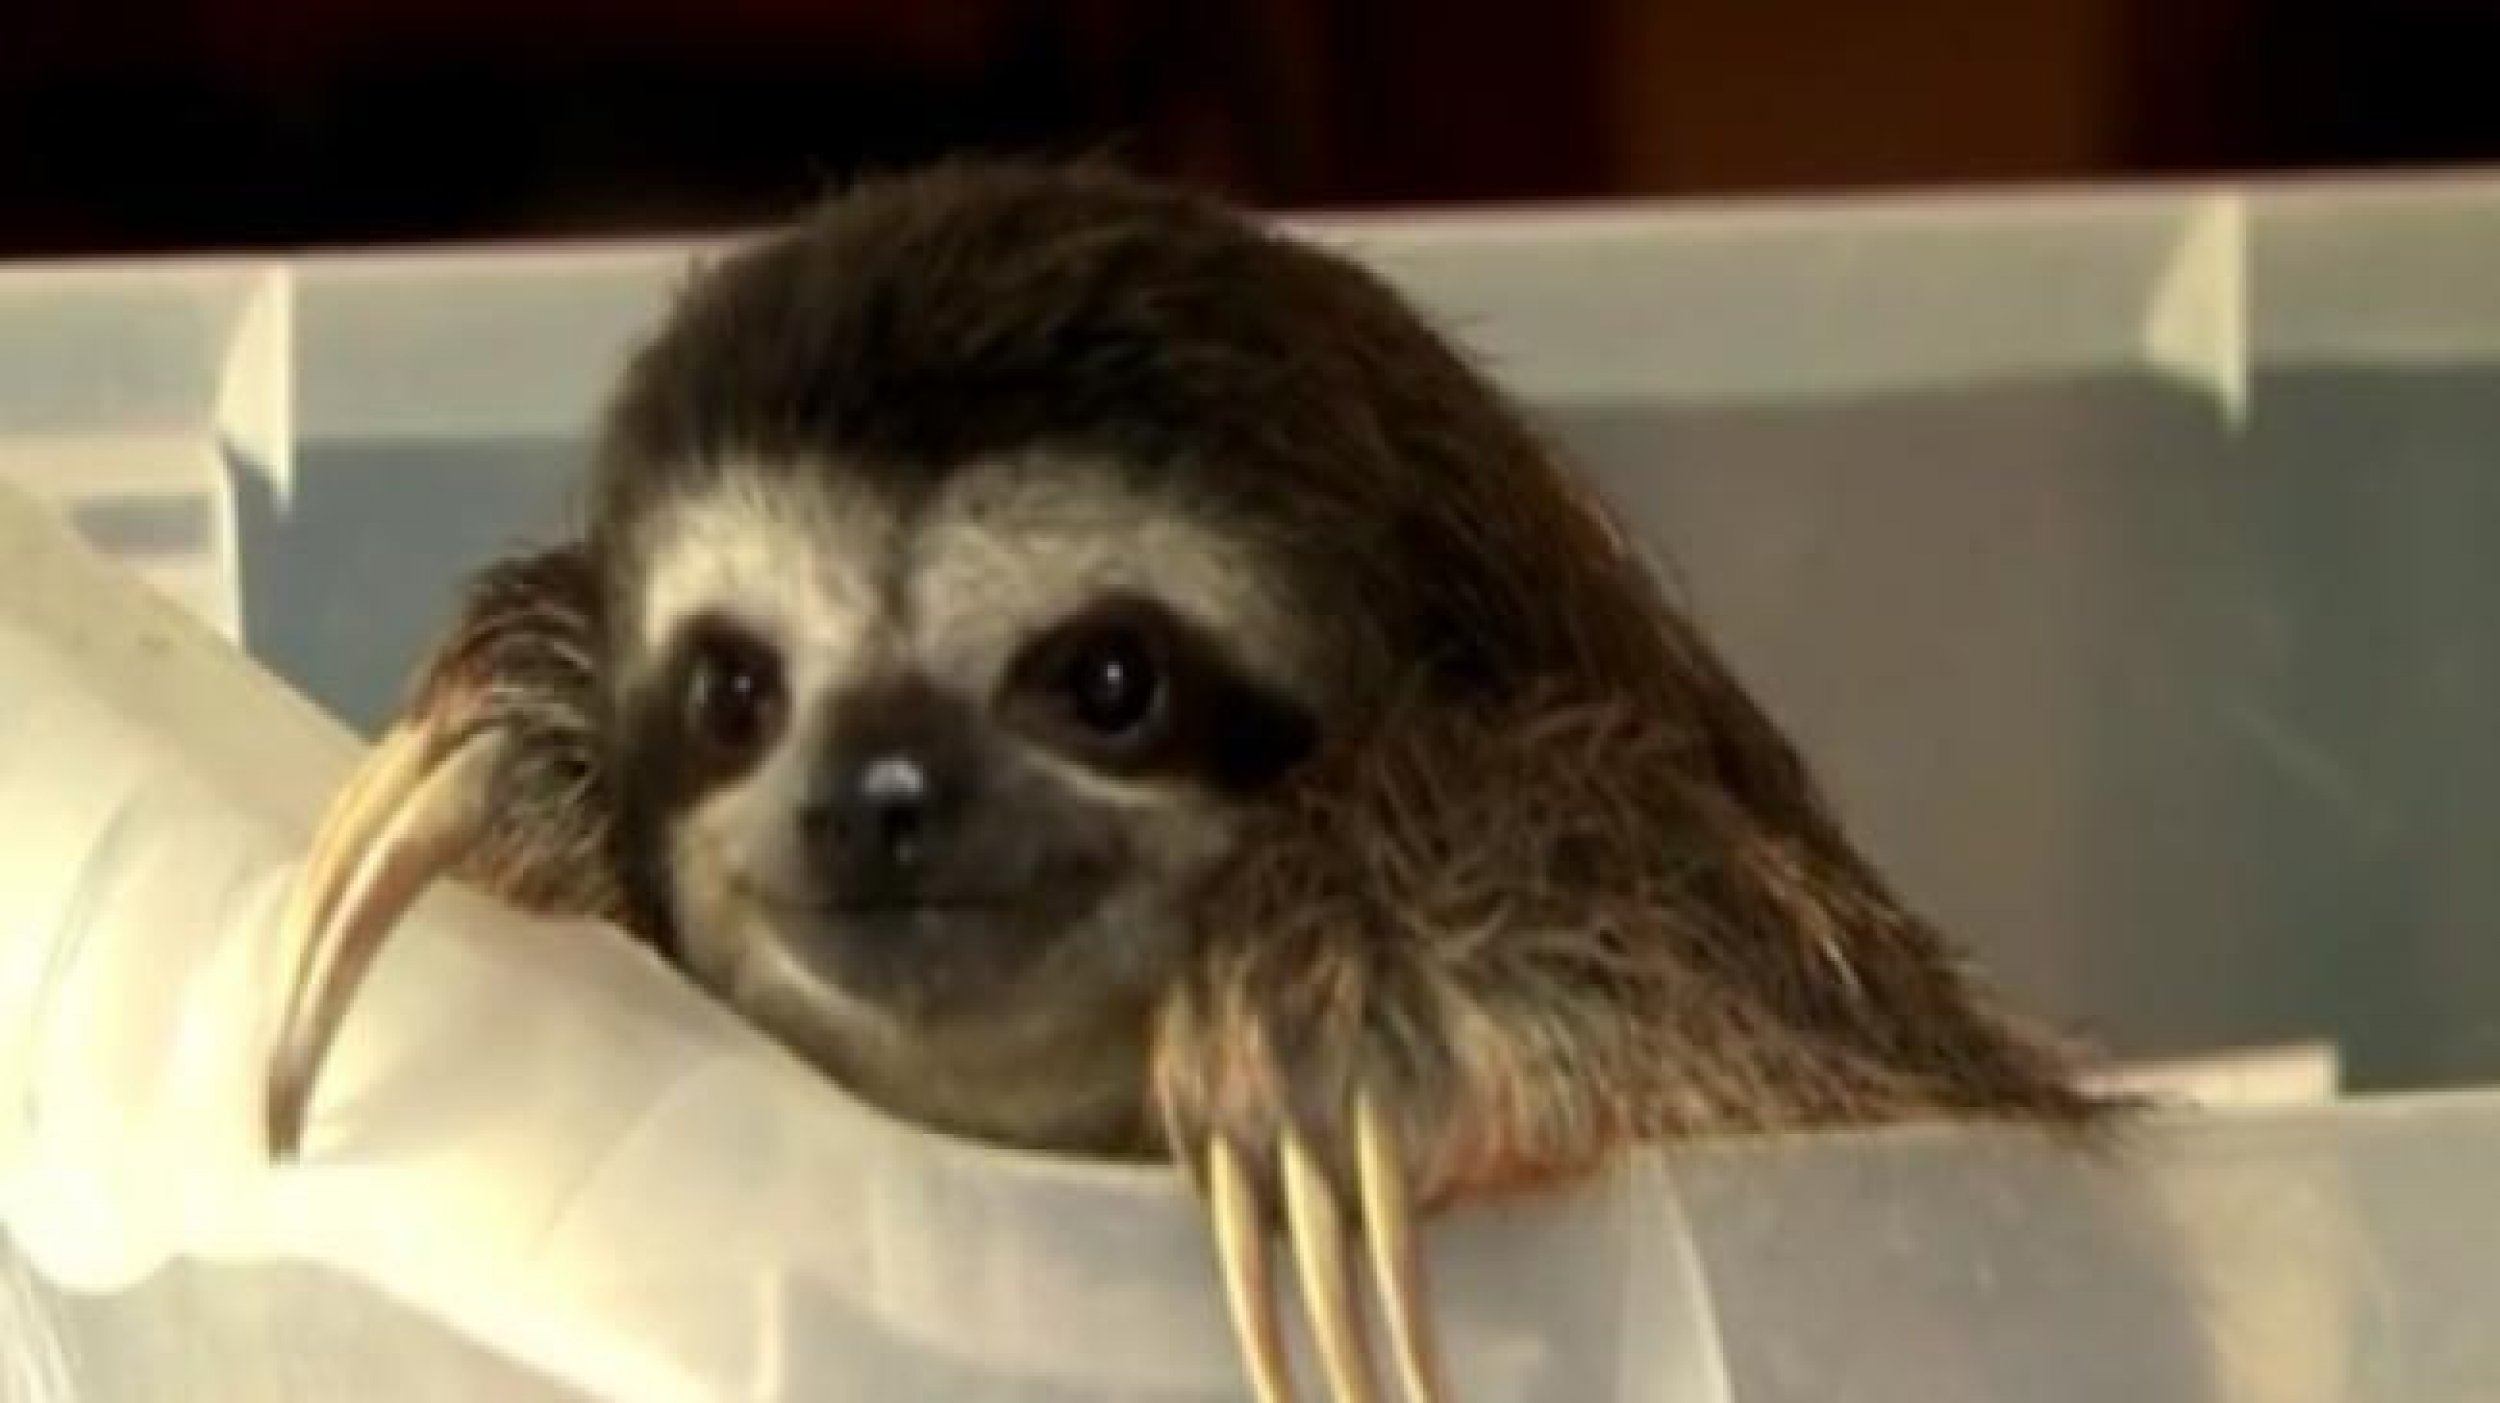 Sloth Sanctuary Provides Rehabilitation and Welcomes Swarms of Tourists